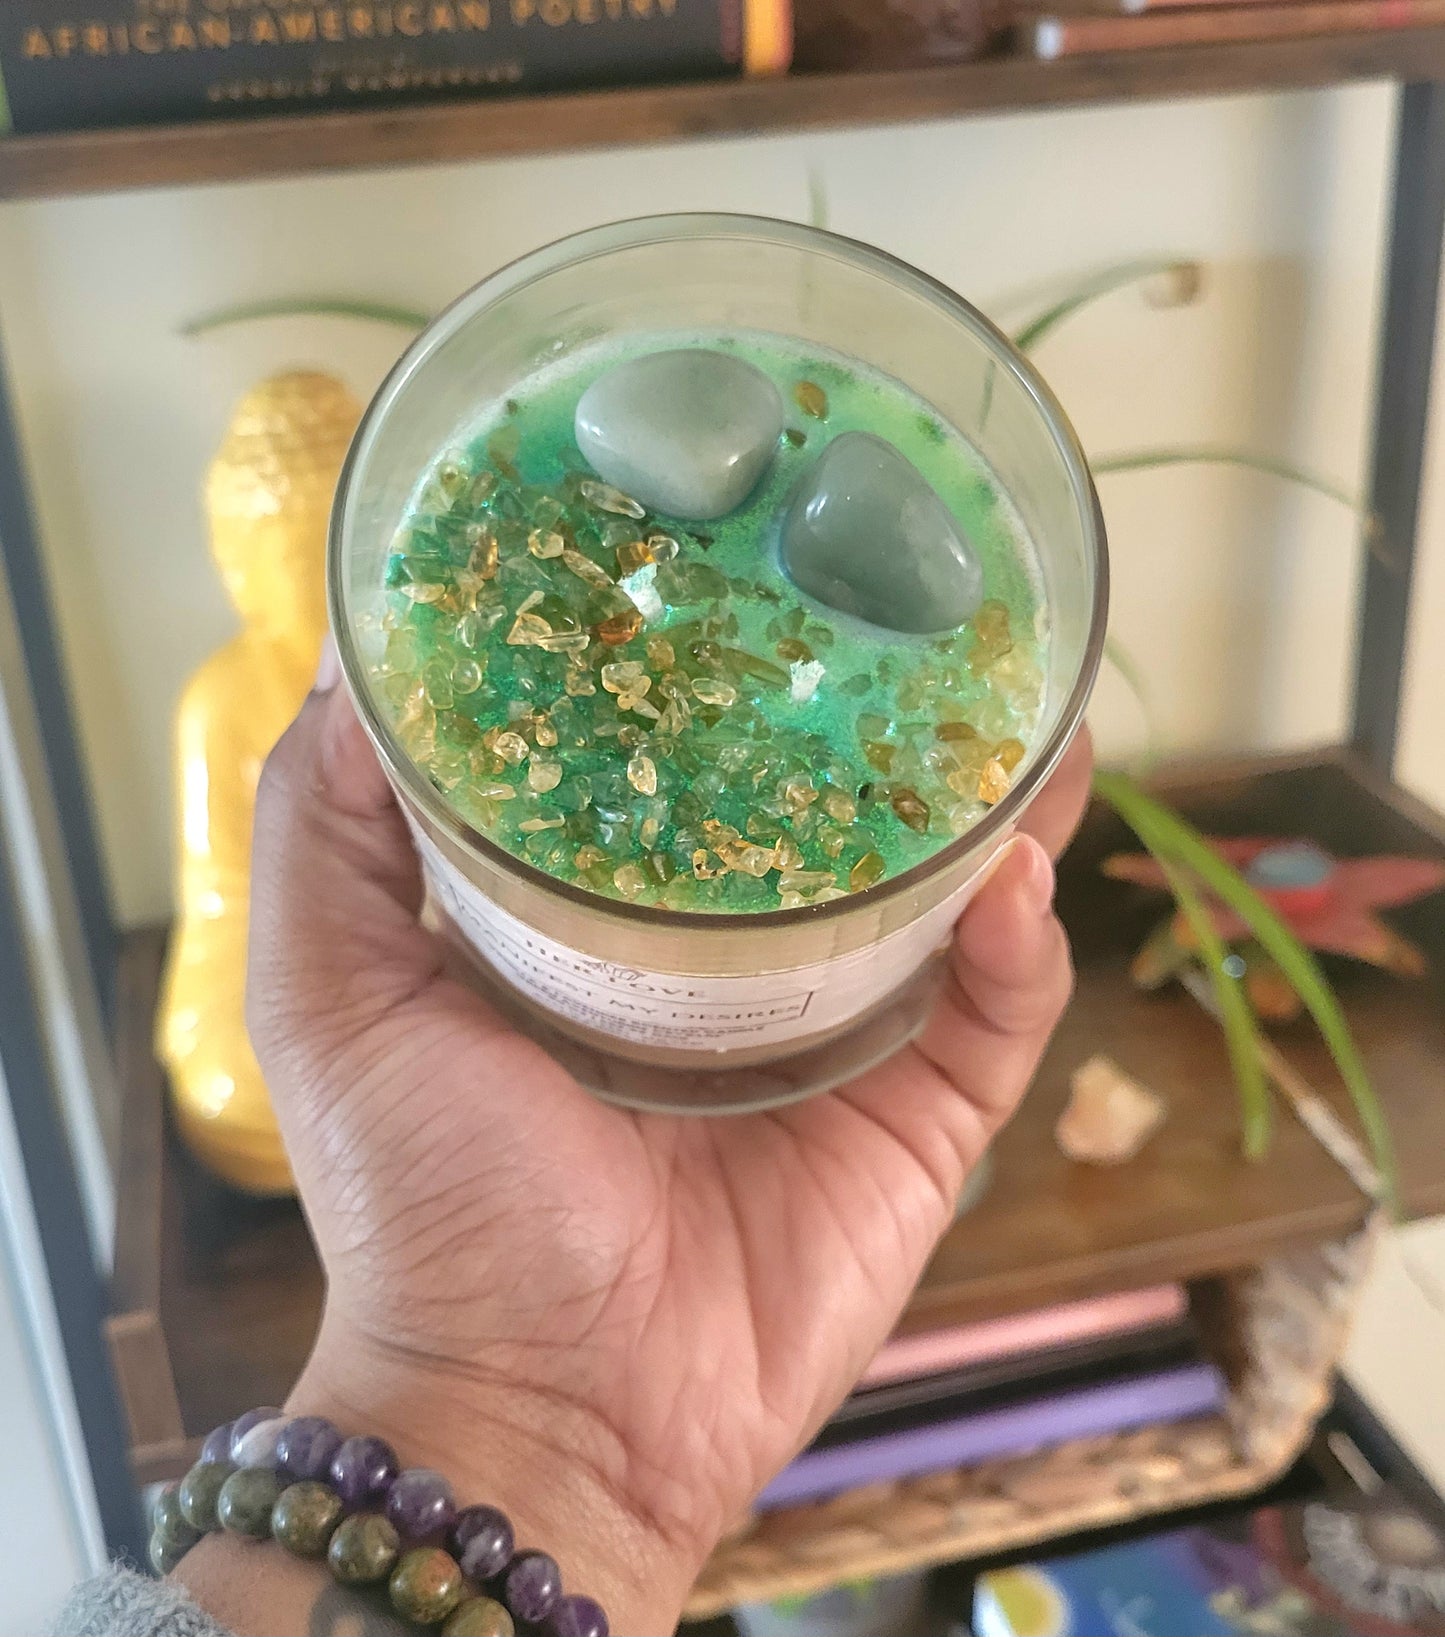 Manifest My Desires Soy Crystal Candle